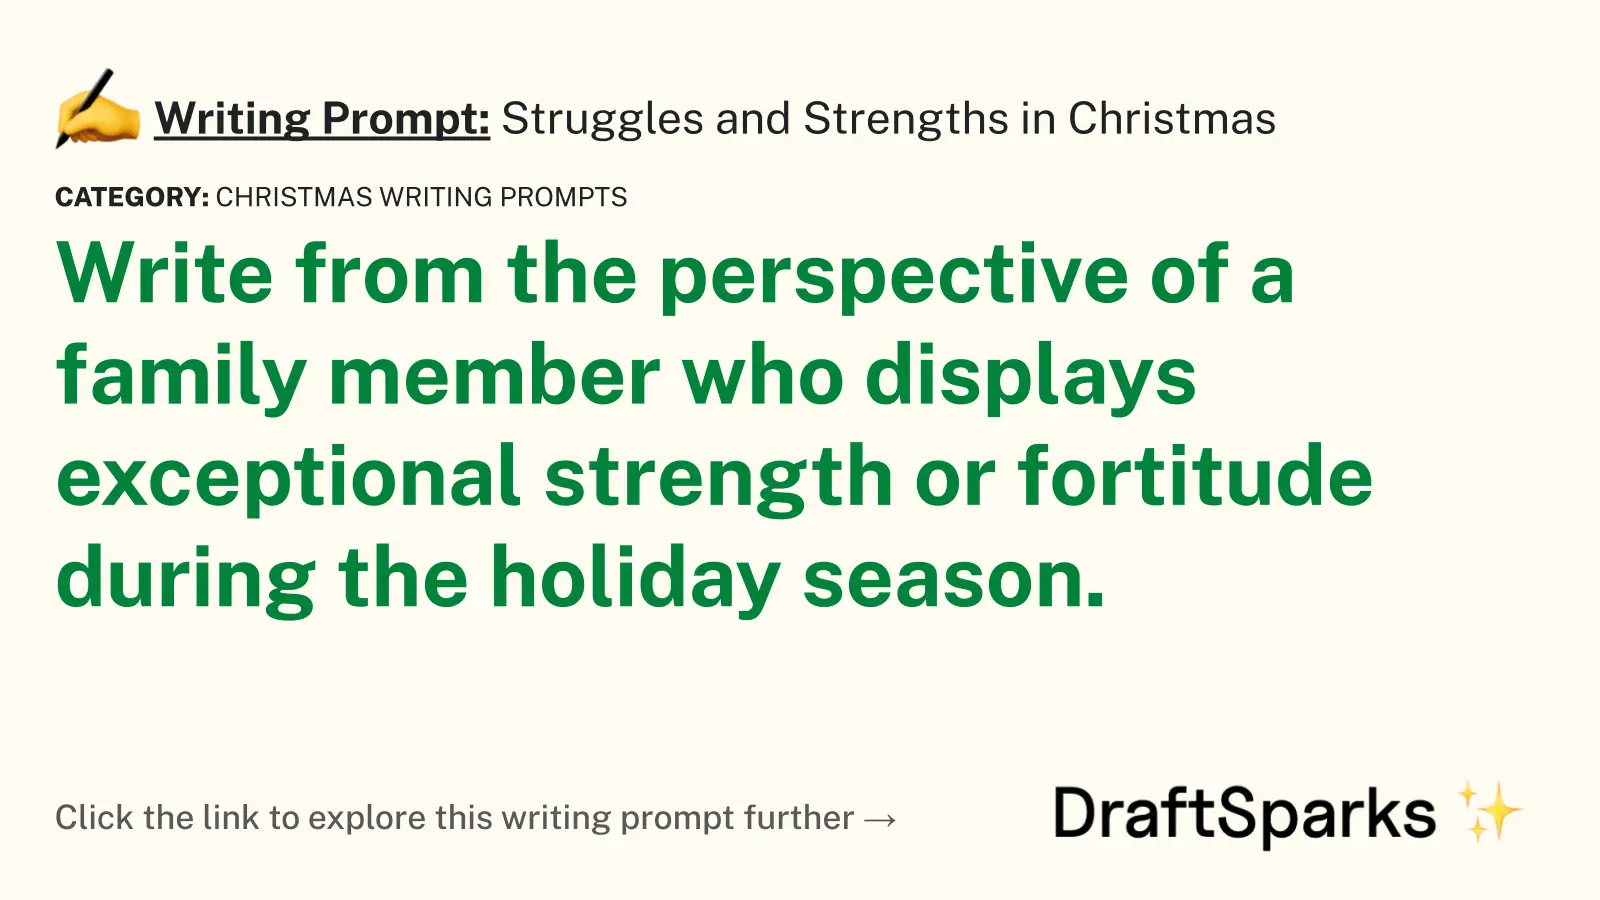 Struggles and Strengths in Christmas